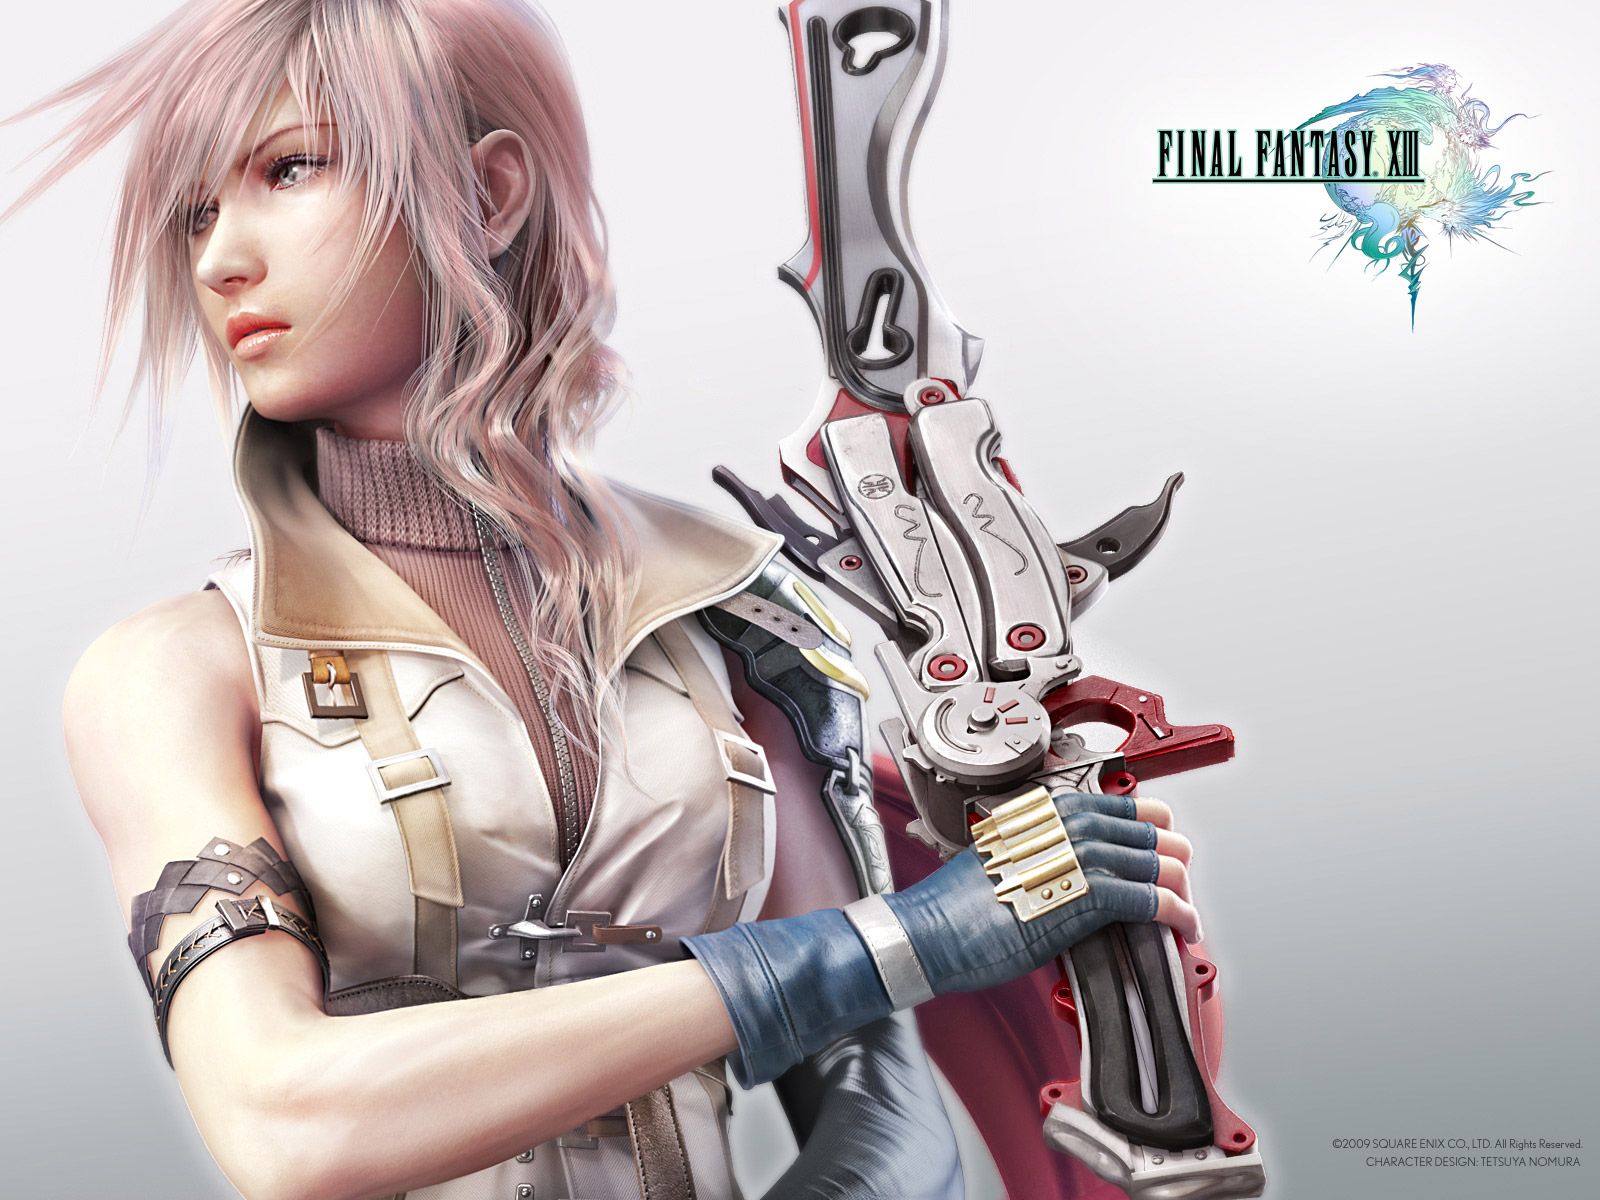 Final Fantasy XIII Game Wallpapers | HD Wallpapers